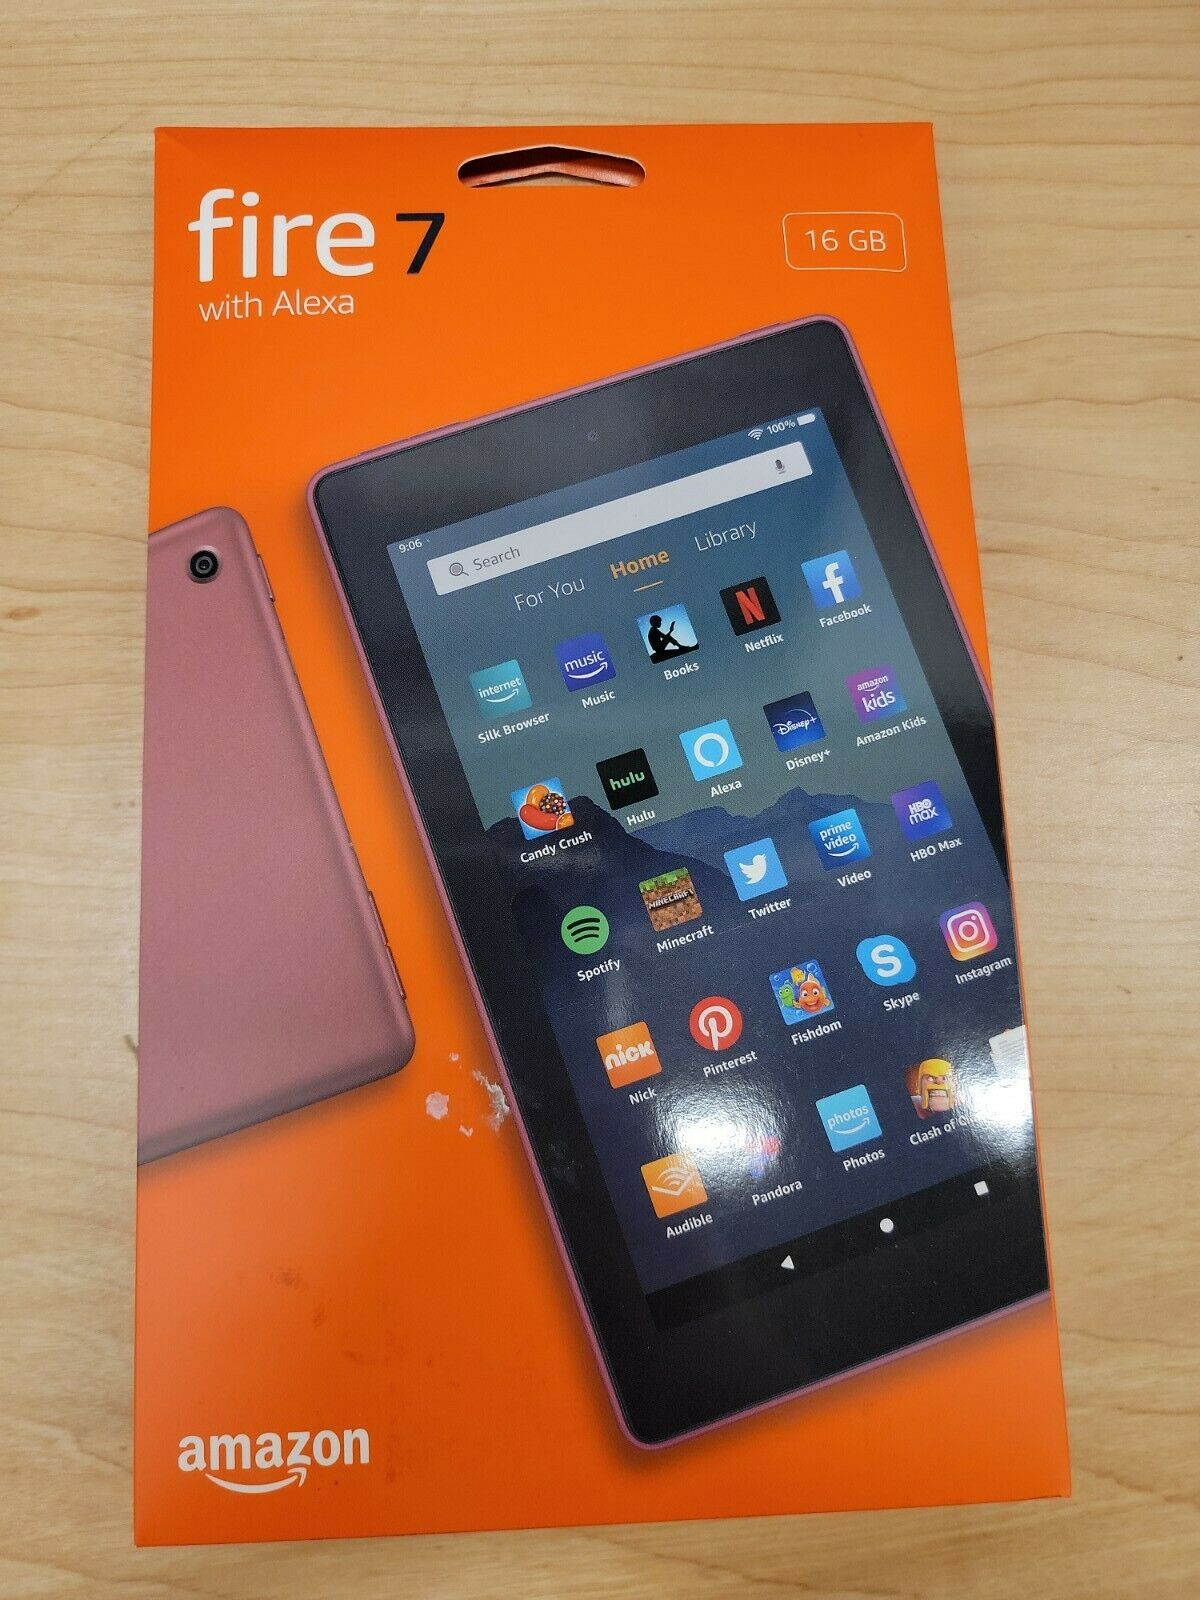 Amazon Fire 7 tablet, 7" display, 16 GB, latest model (2019 release), Plum